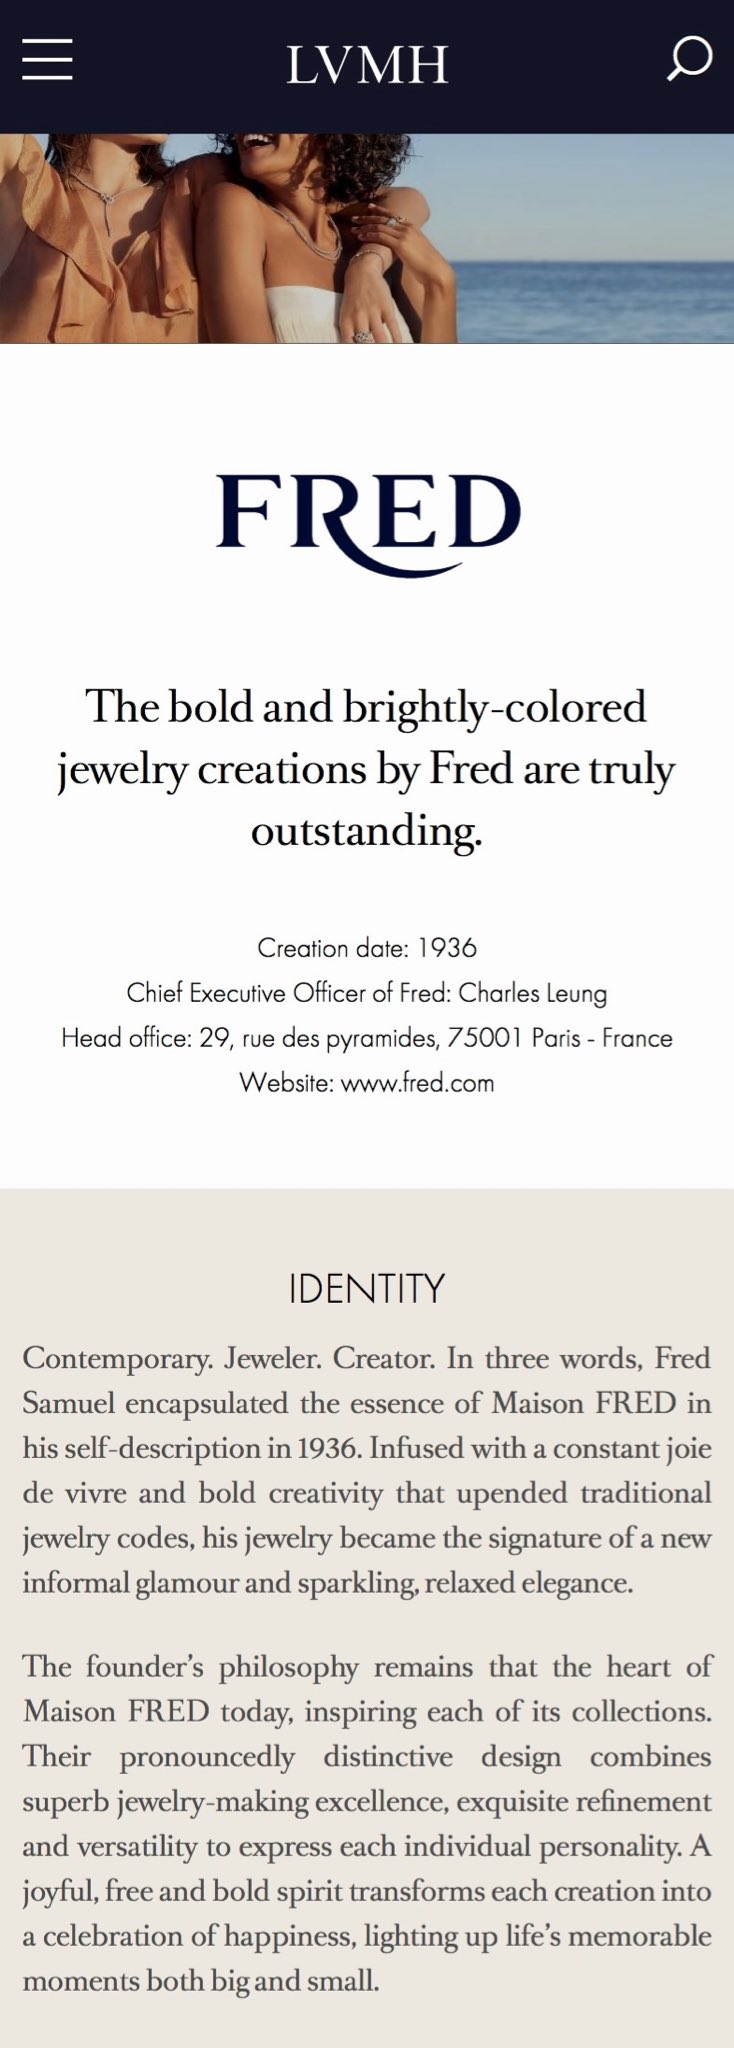 gladyoucome  Becky's Q0 on X: FRED is the subsidiary of LVMH which known  as a French multinational holding and conglomerate specializing in luxury  goods. LVMH's portfolio includes Tiffany & Co., Christian